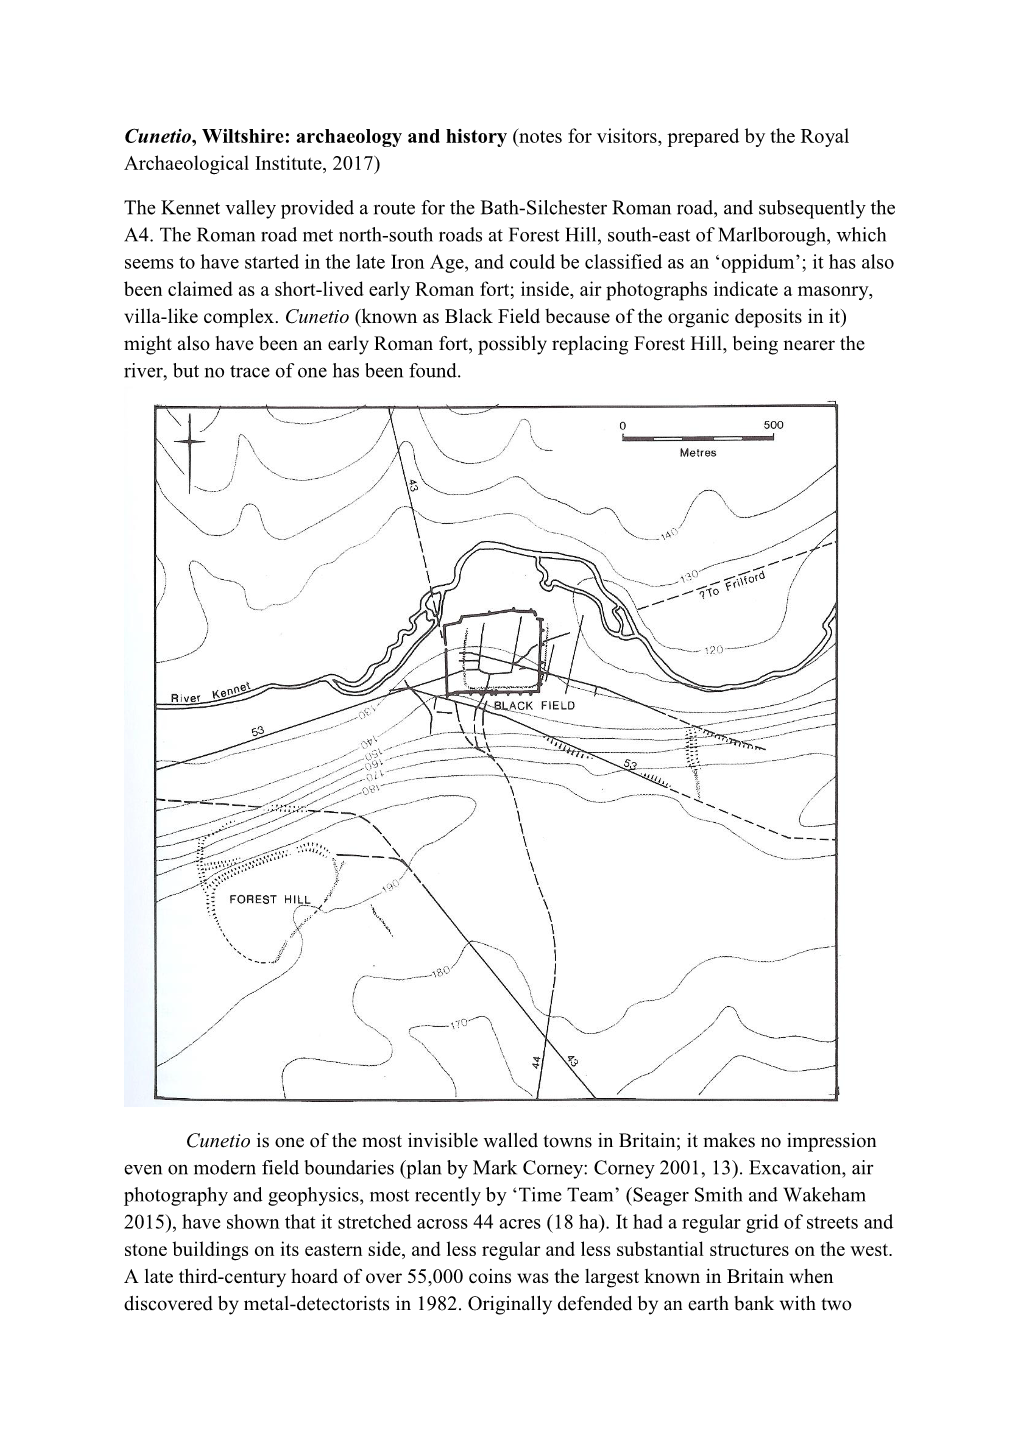 Cunetio, Wiltshire: Archaeology and History (Notes for Visitors, Prepared by the Royal Archaeological Institute, 2017) the Kenne